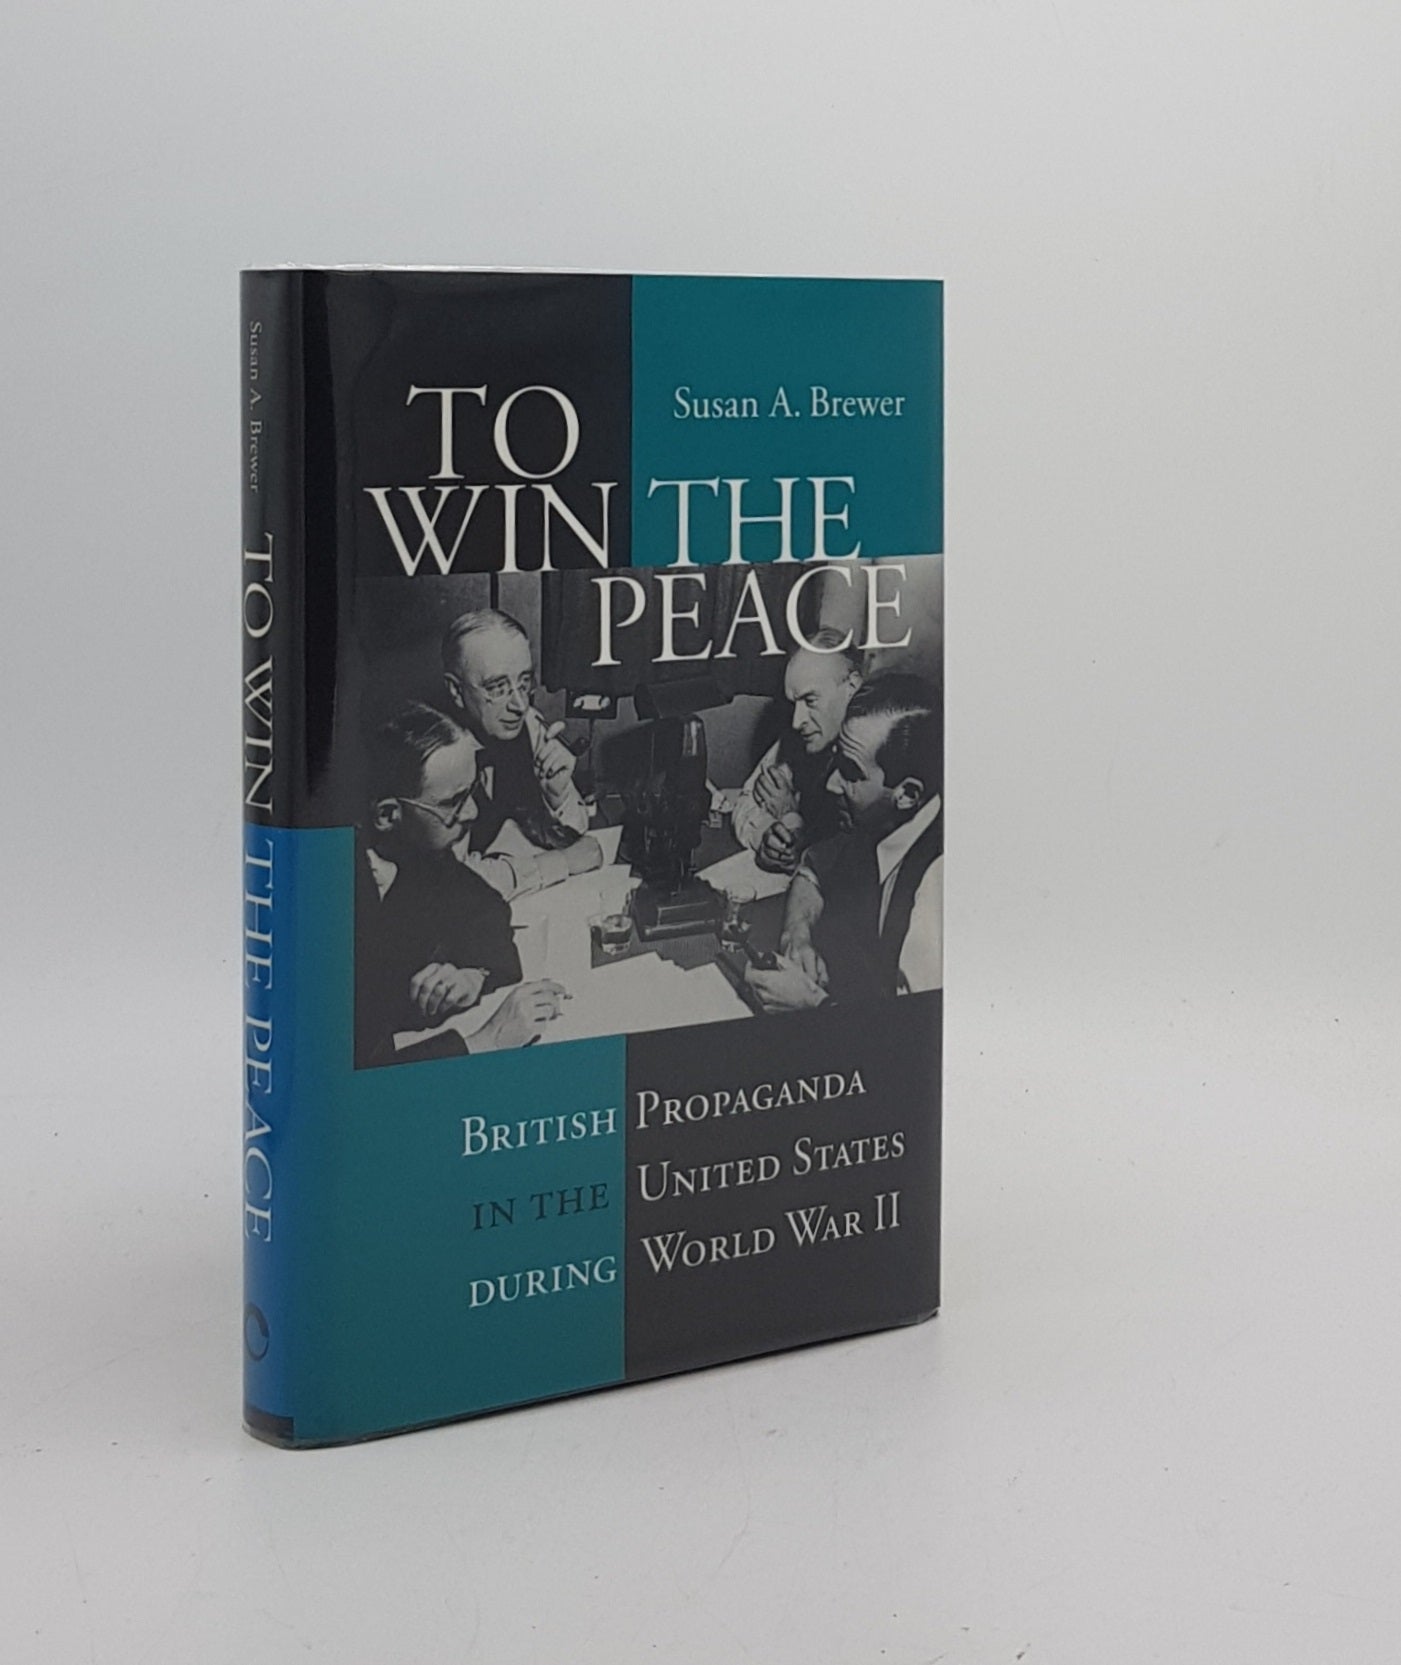 BREWER Susan A. - To Win the Peace British Propaganda in the United States During World War II